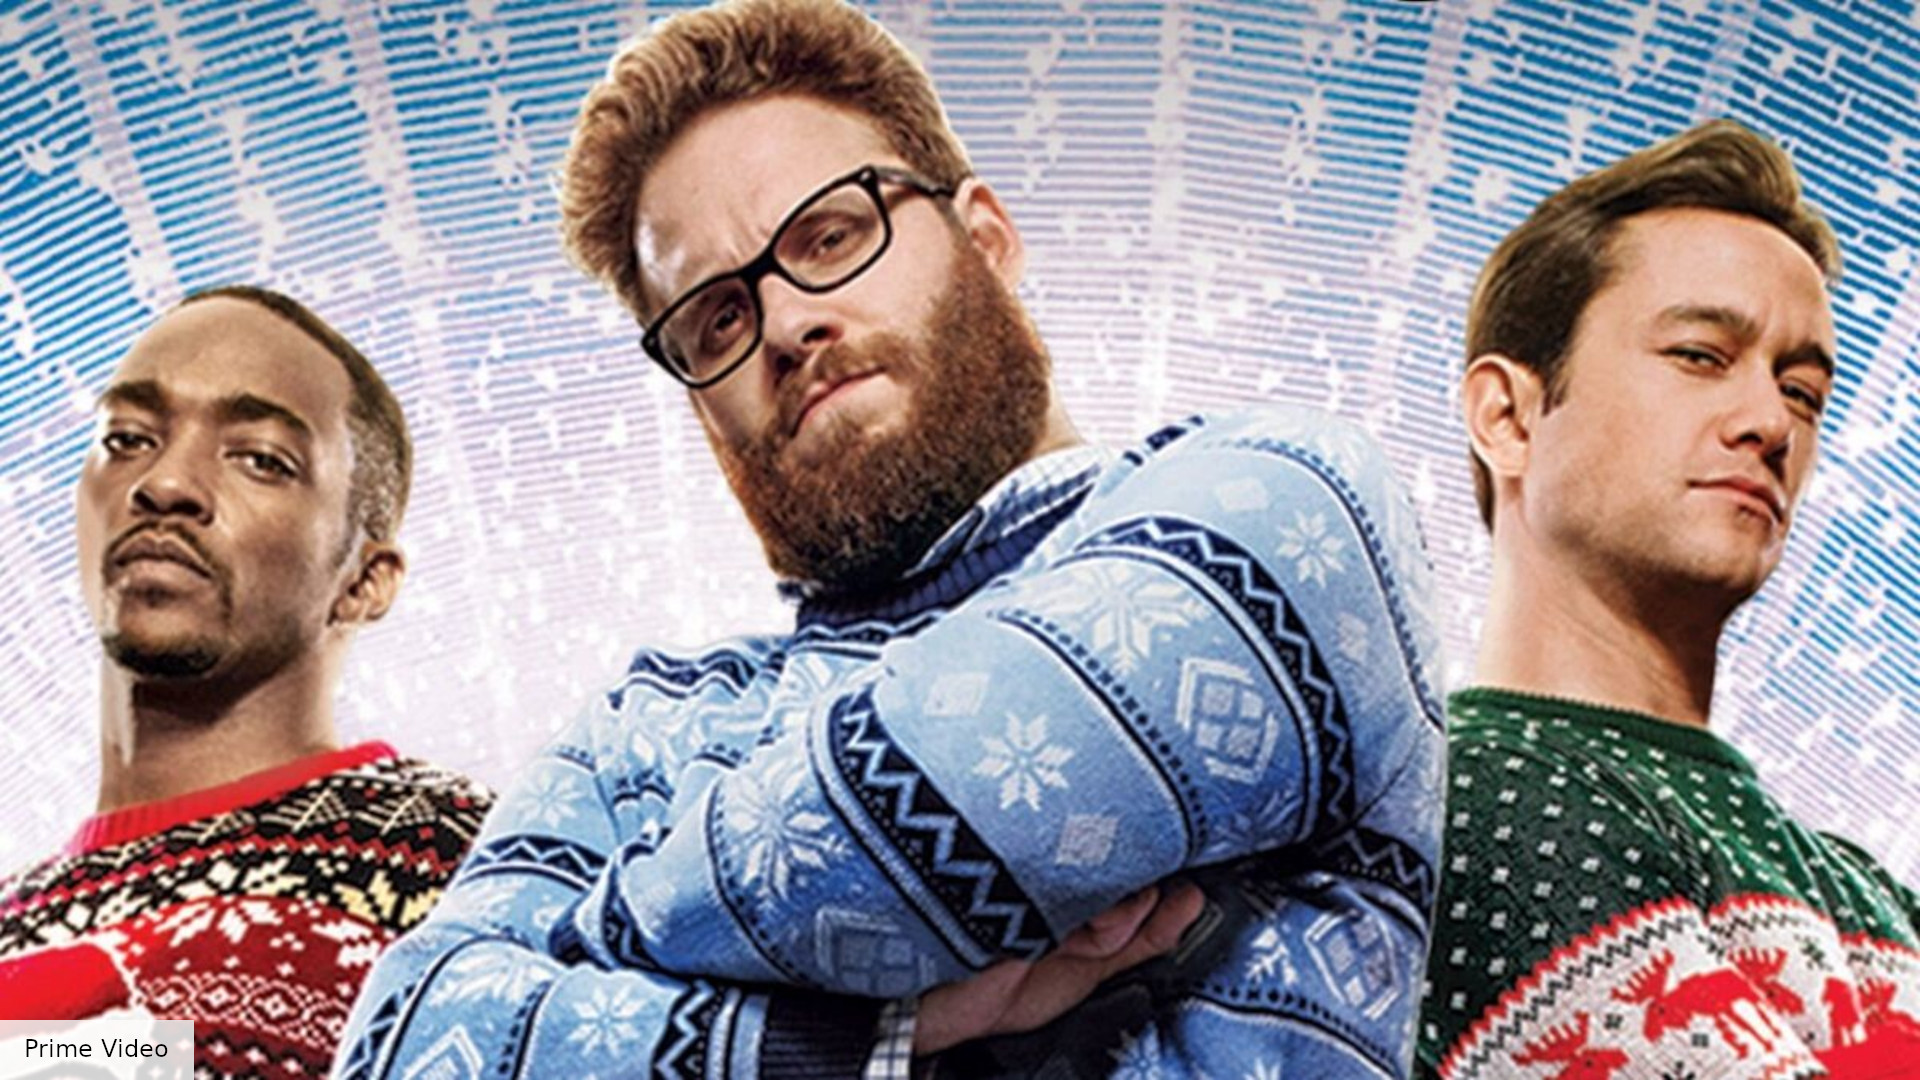 The best Amazon Prime Christmas movies you can stream right now